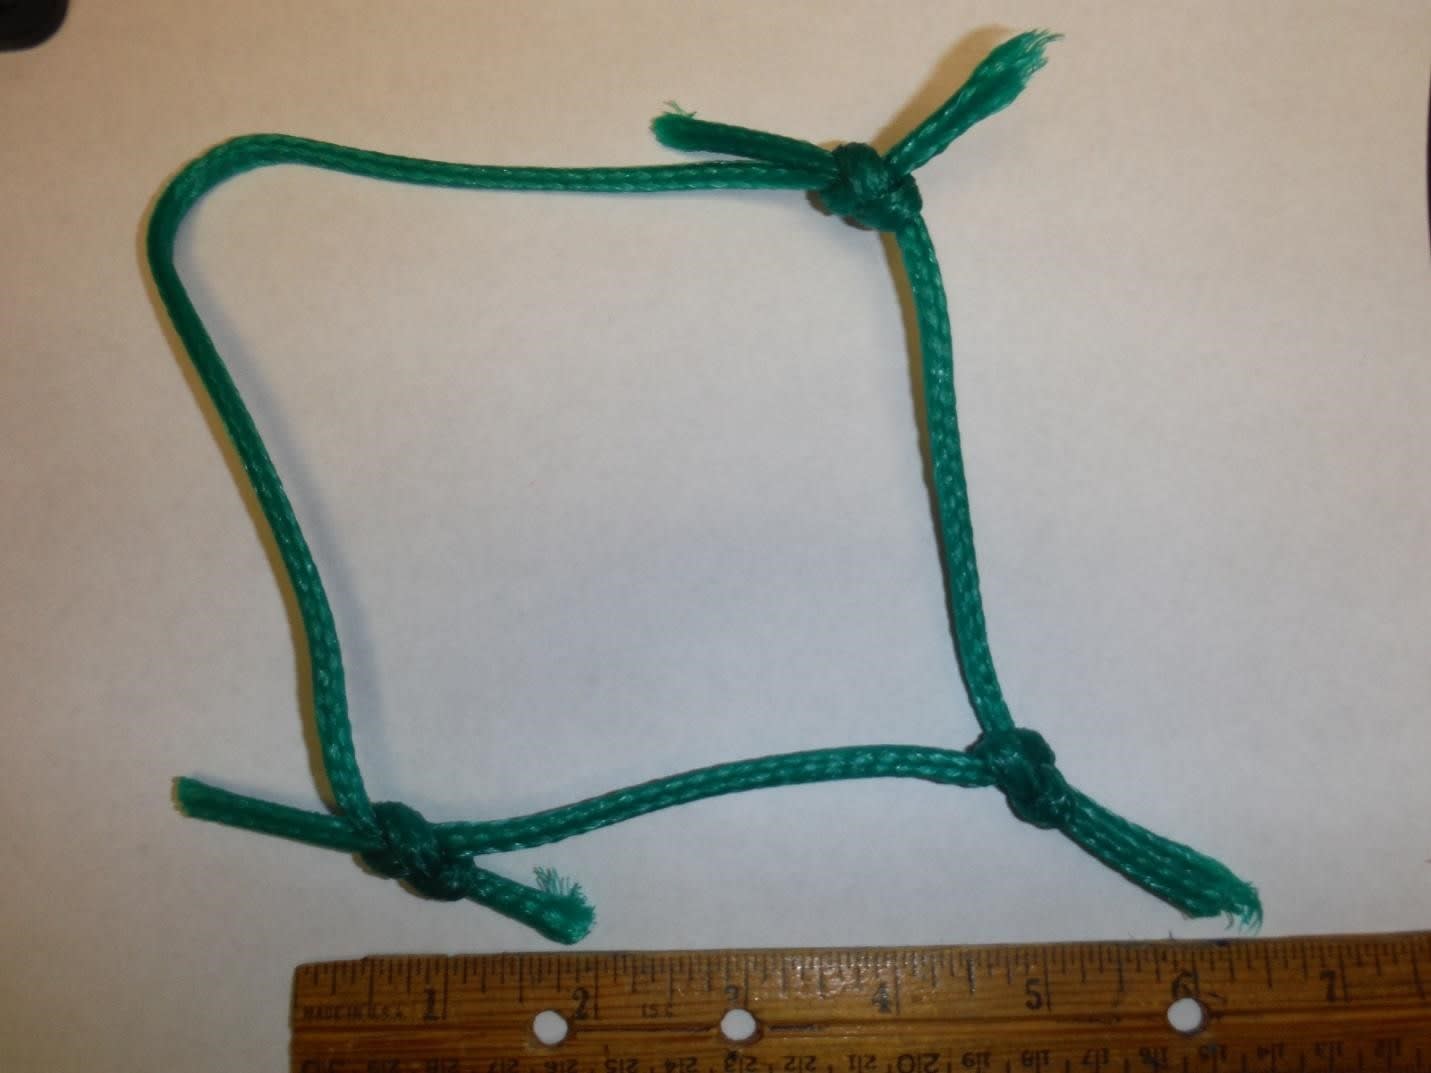 green-braided, knotted 10" 3.5mm soccer netting